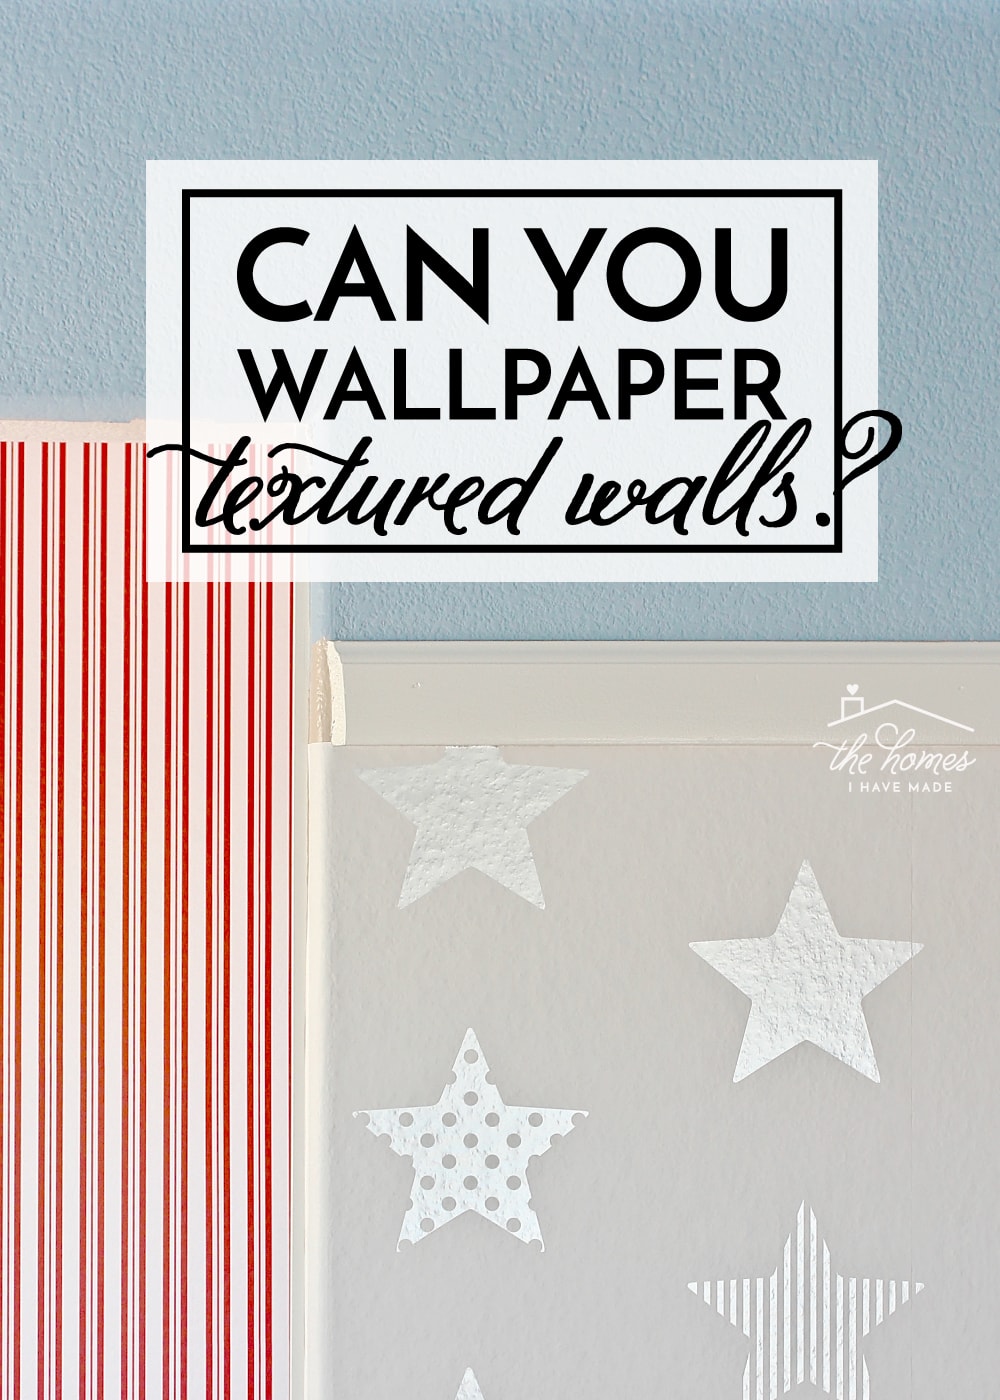 Can You Wallpaper Textured Walls? - The Homes I Have Made